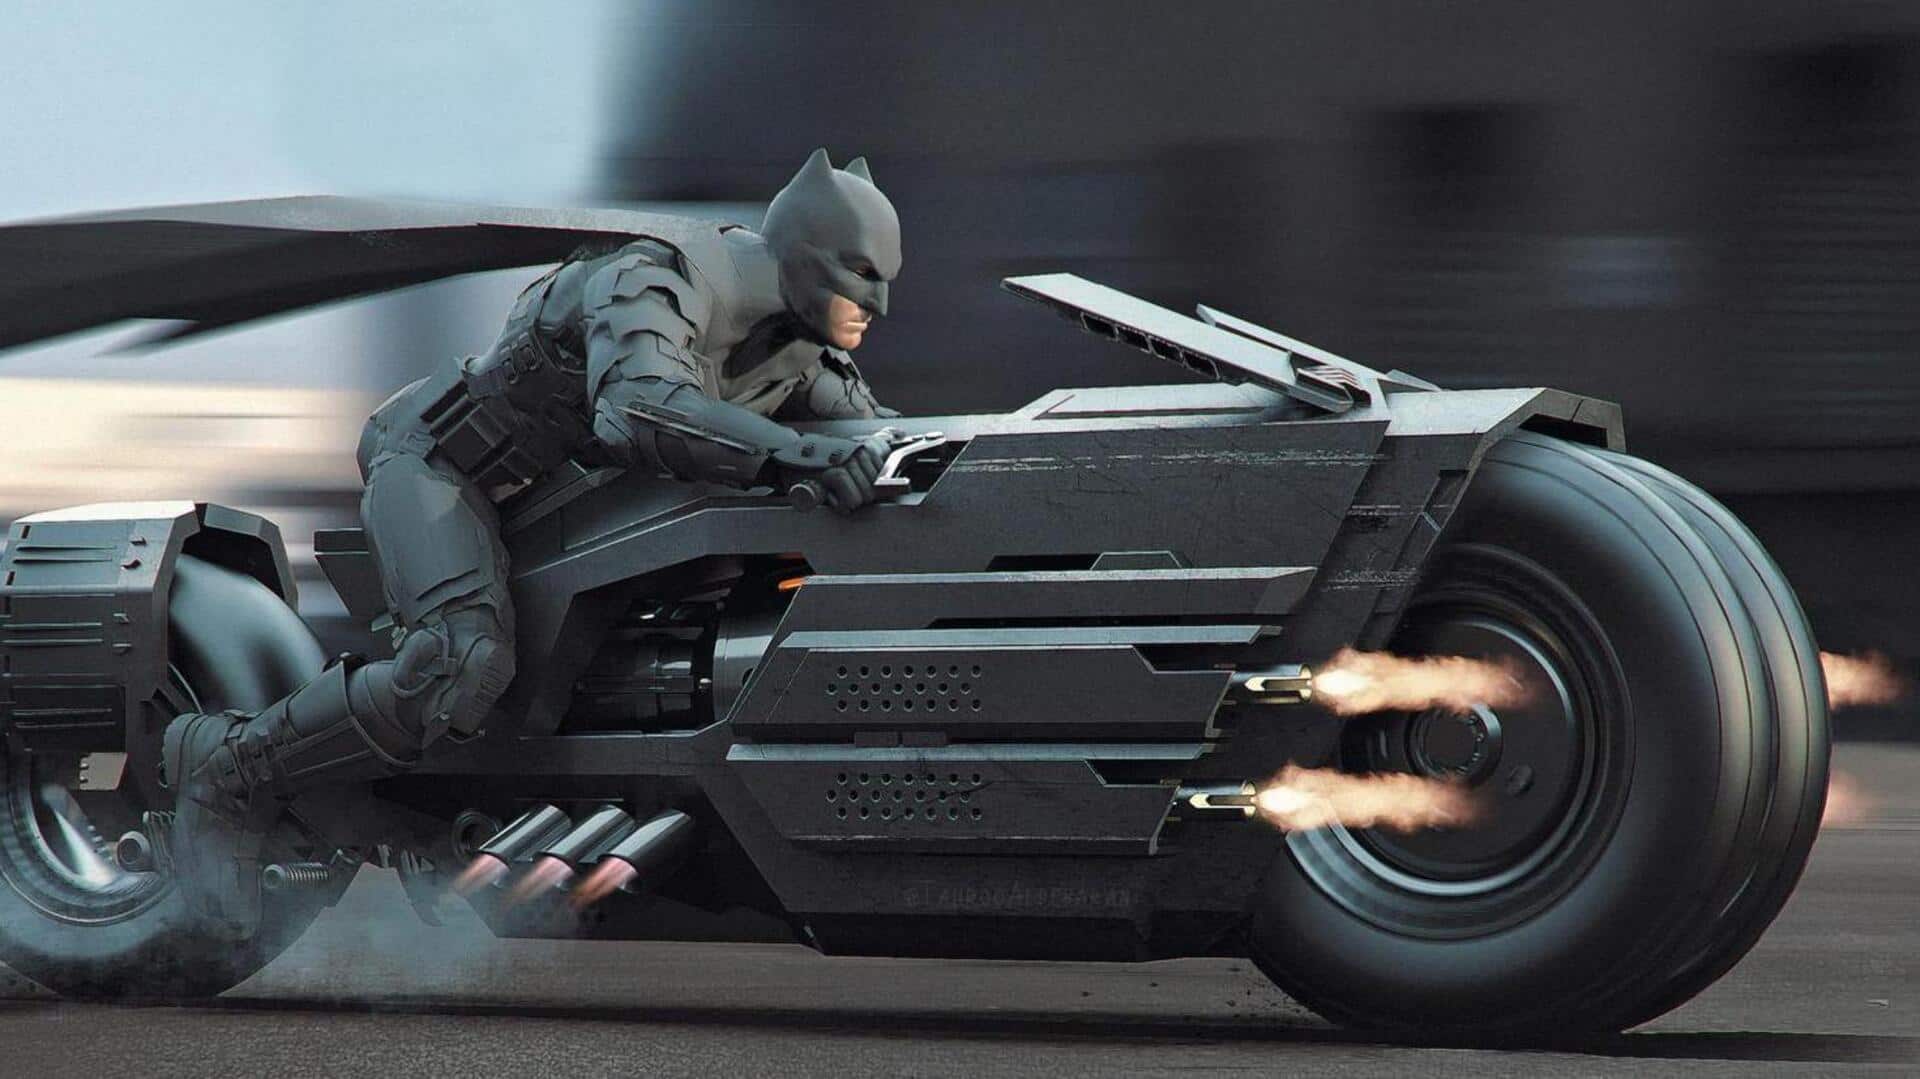 Motorcycles that can easily replace Batman's iconic Batmobile